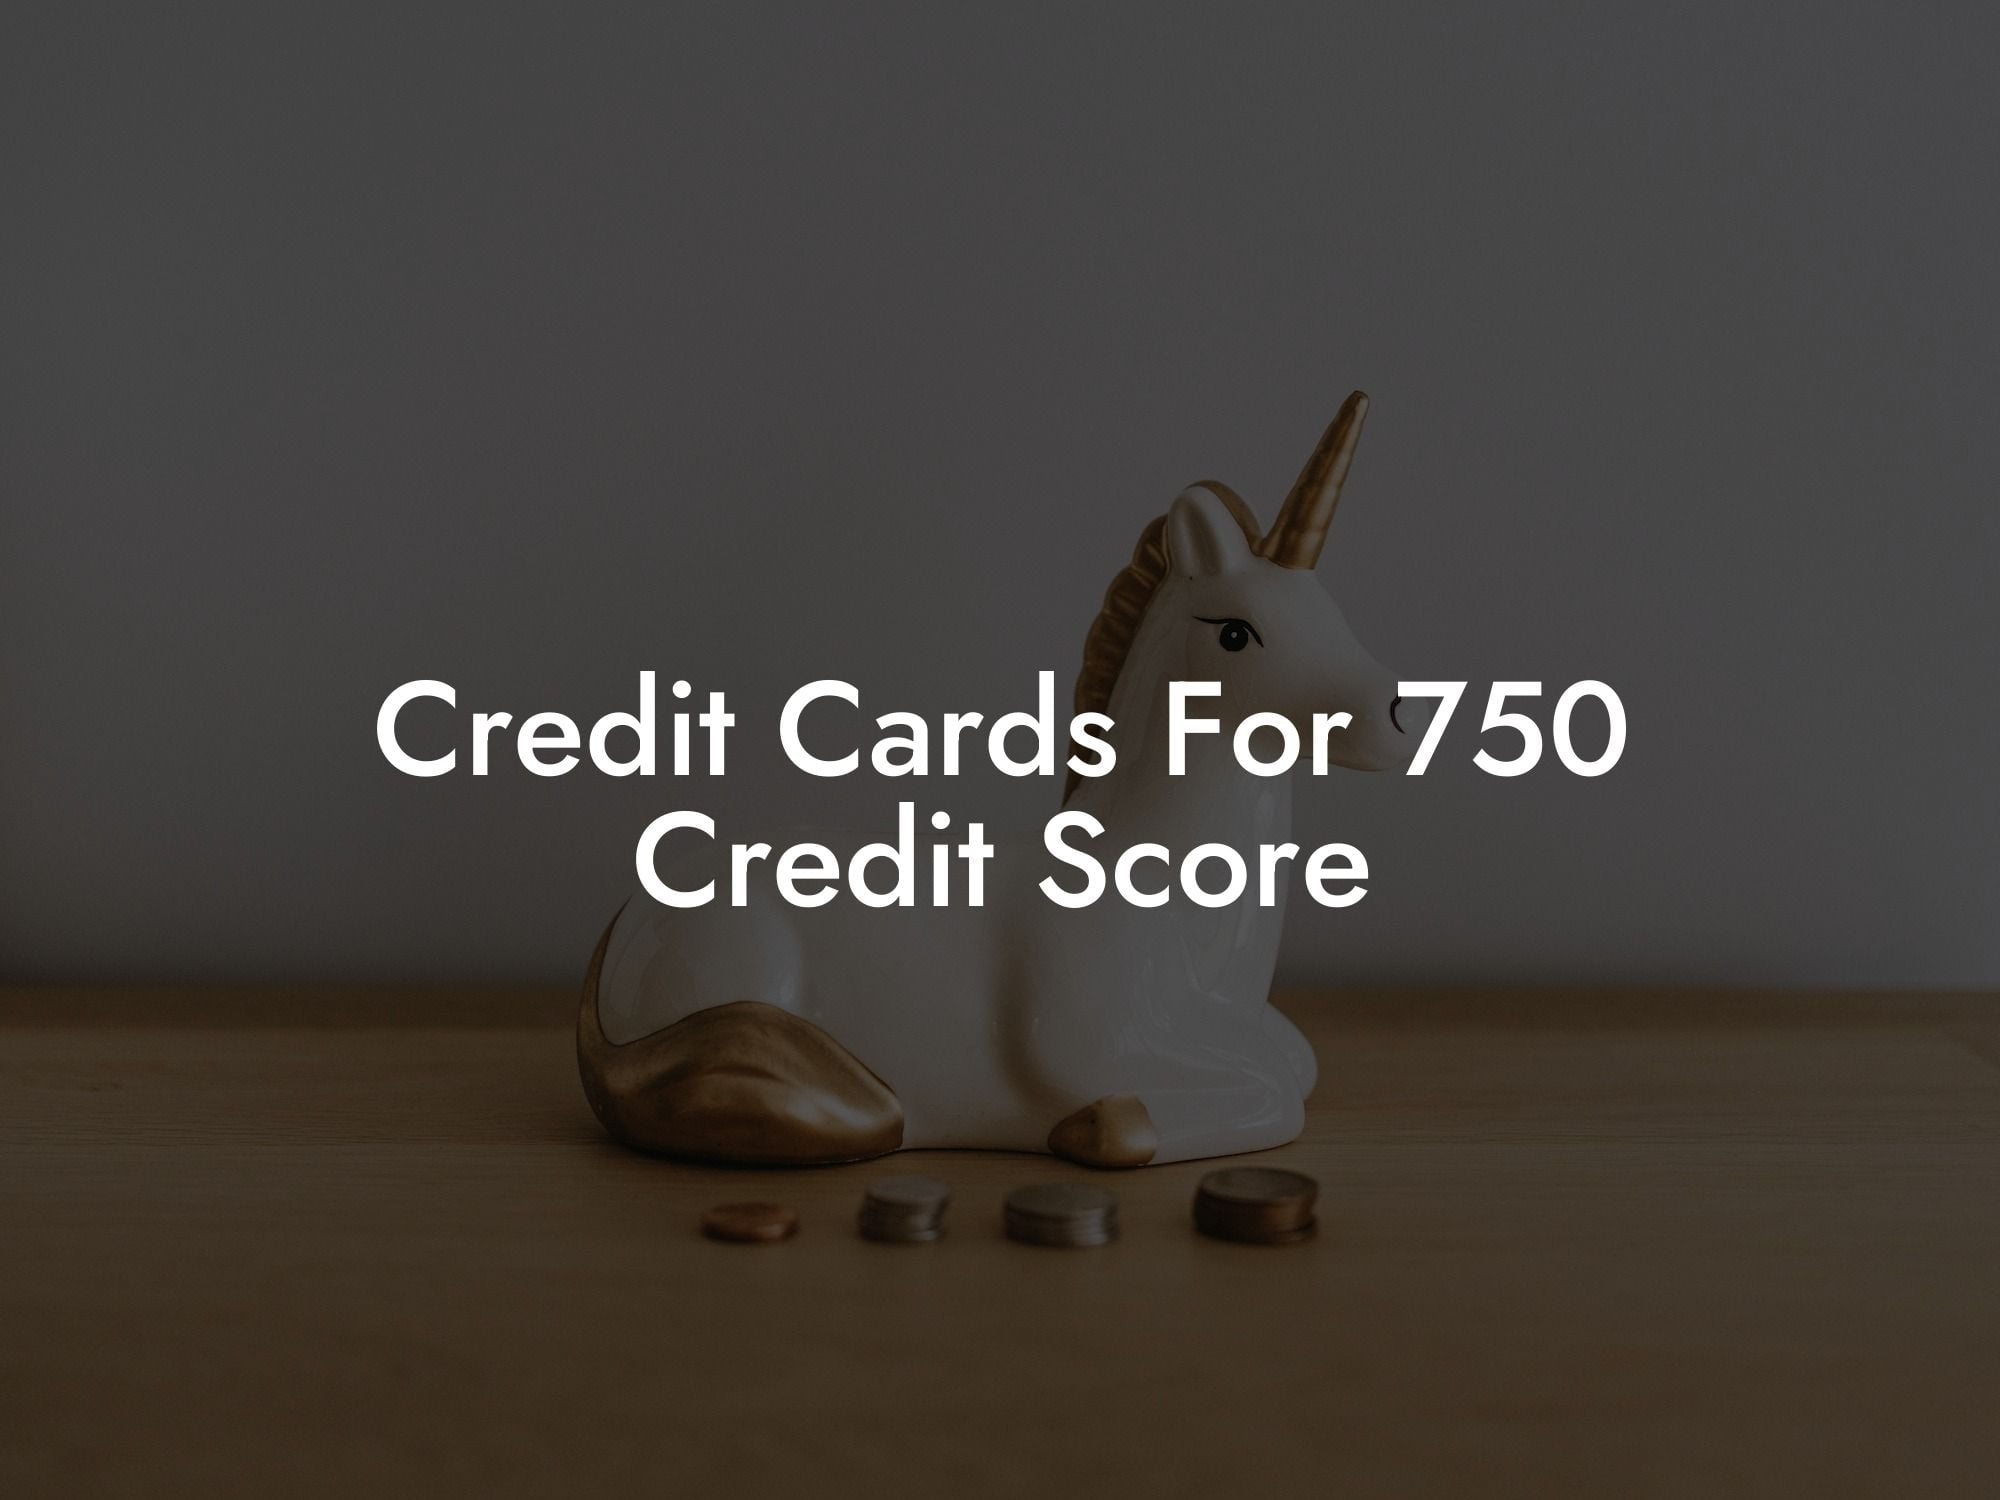 Credit Cards For 750 Credit Score